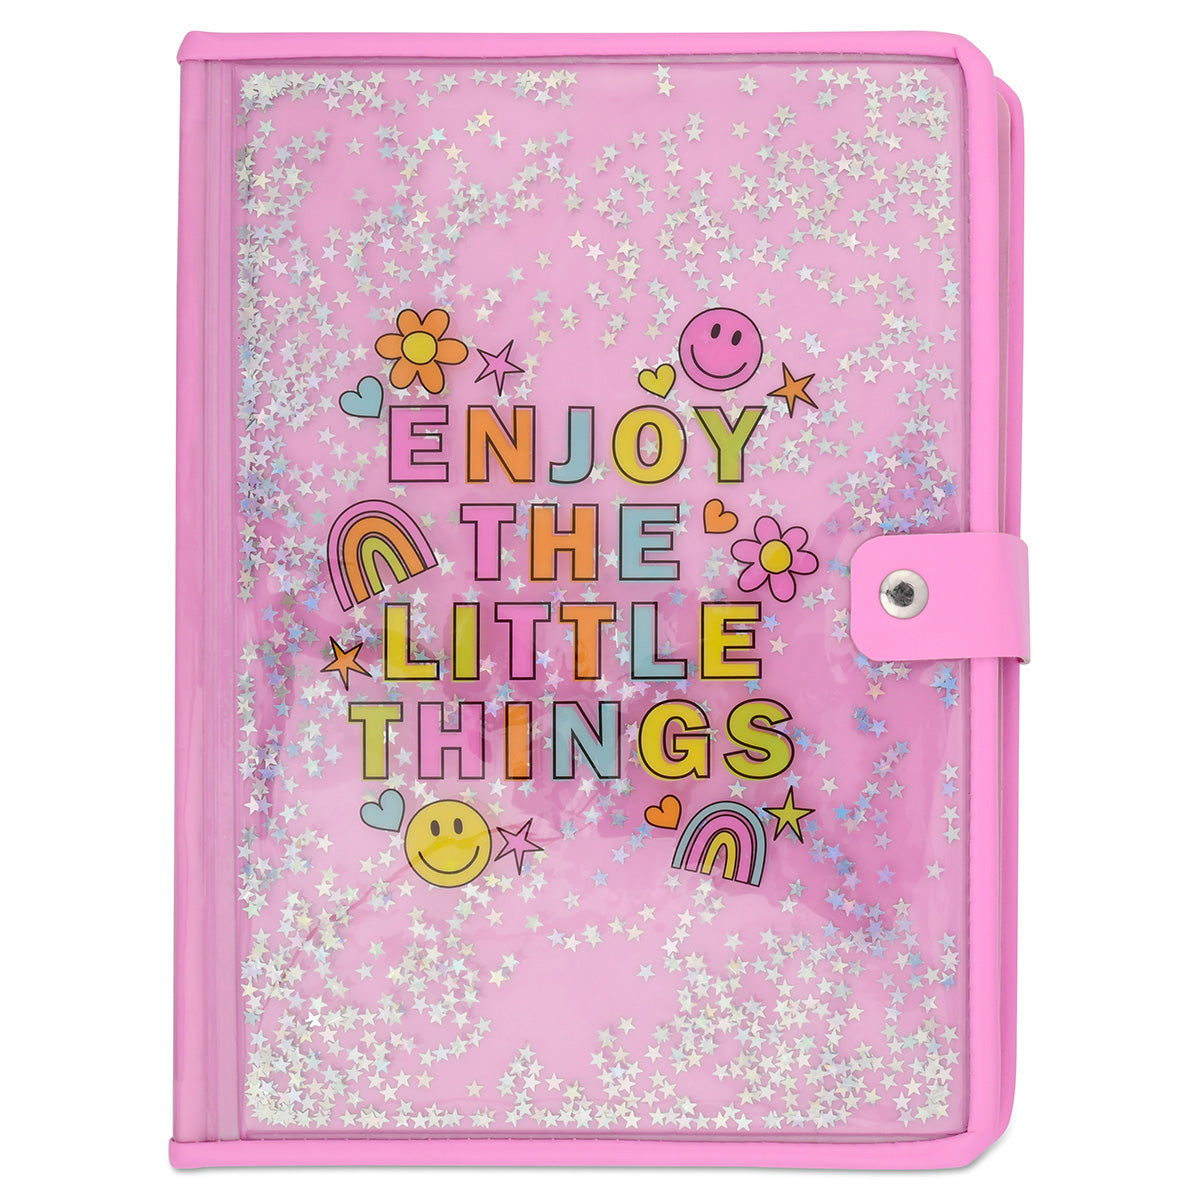 “Enjoy The Little Things” Sticker Storage Book by Iscream #760-1229